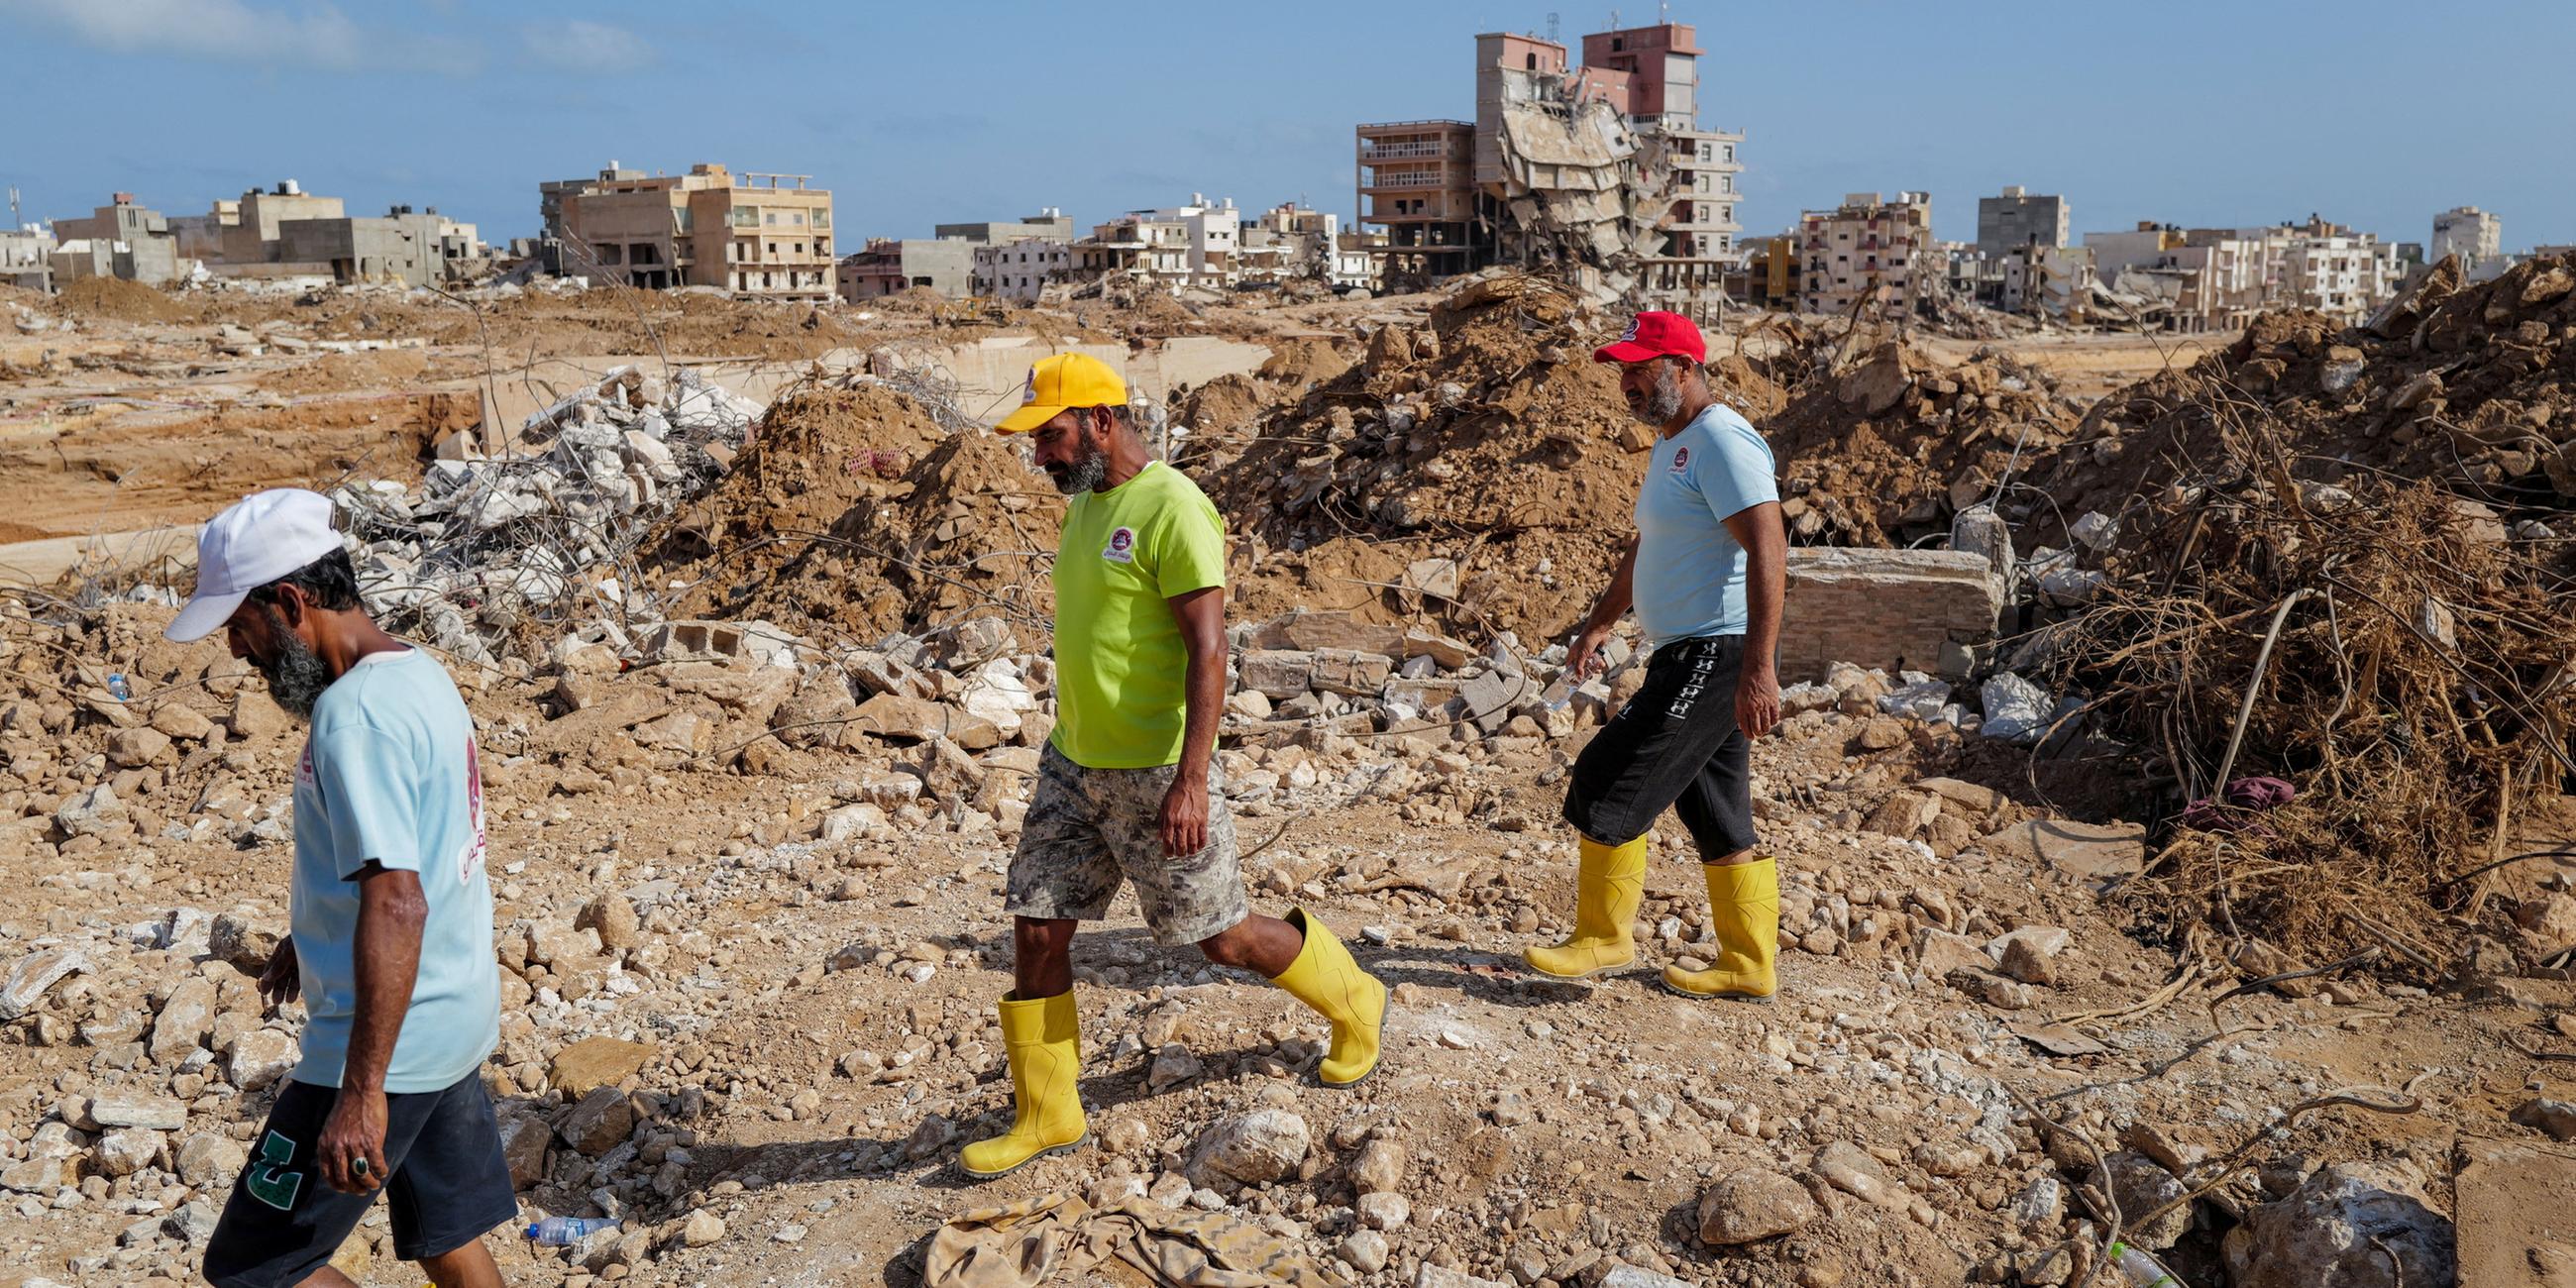 Local rescuers walk amid the rubble of destroyed houses and buildings in the aftermath of the deadly storm that hit Libya, in Derna, Libya September 21, 2023. REUTERS/Zohra Bensemra